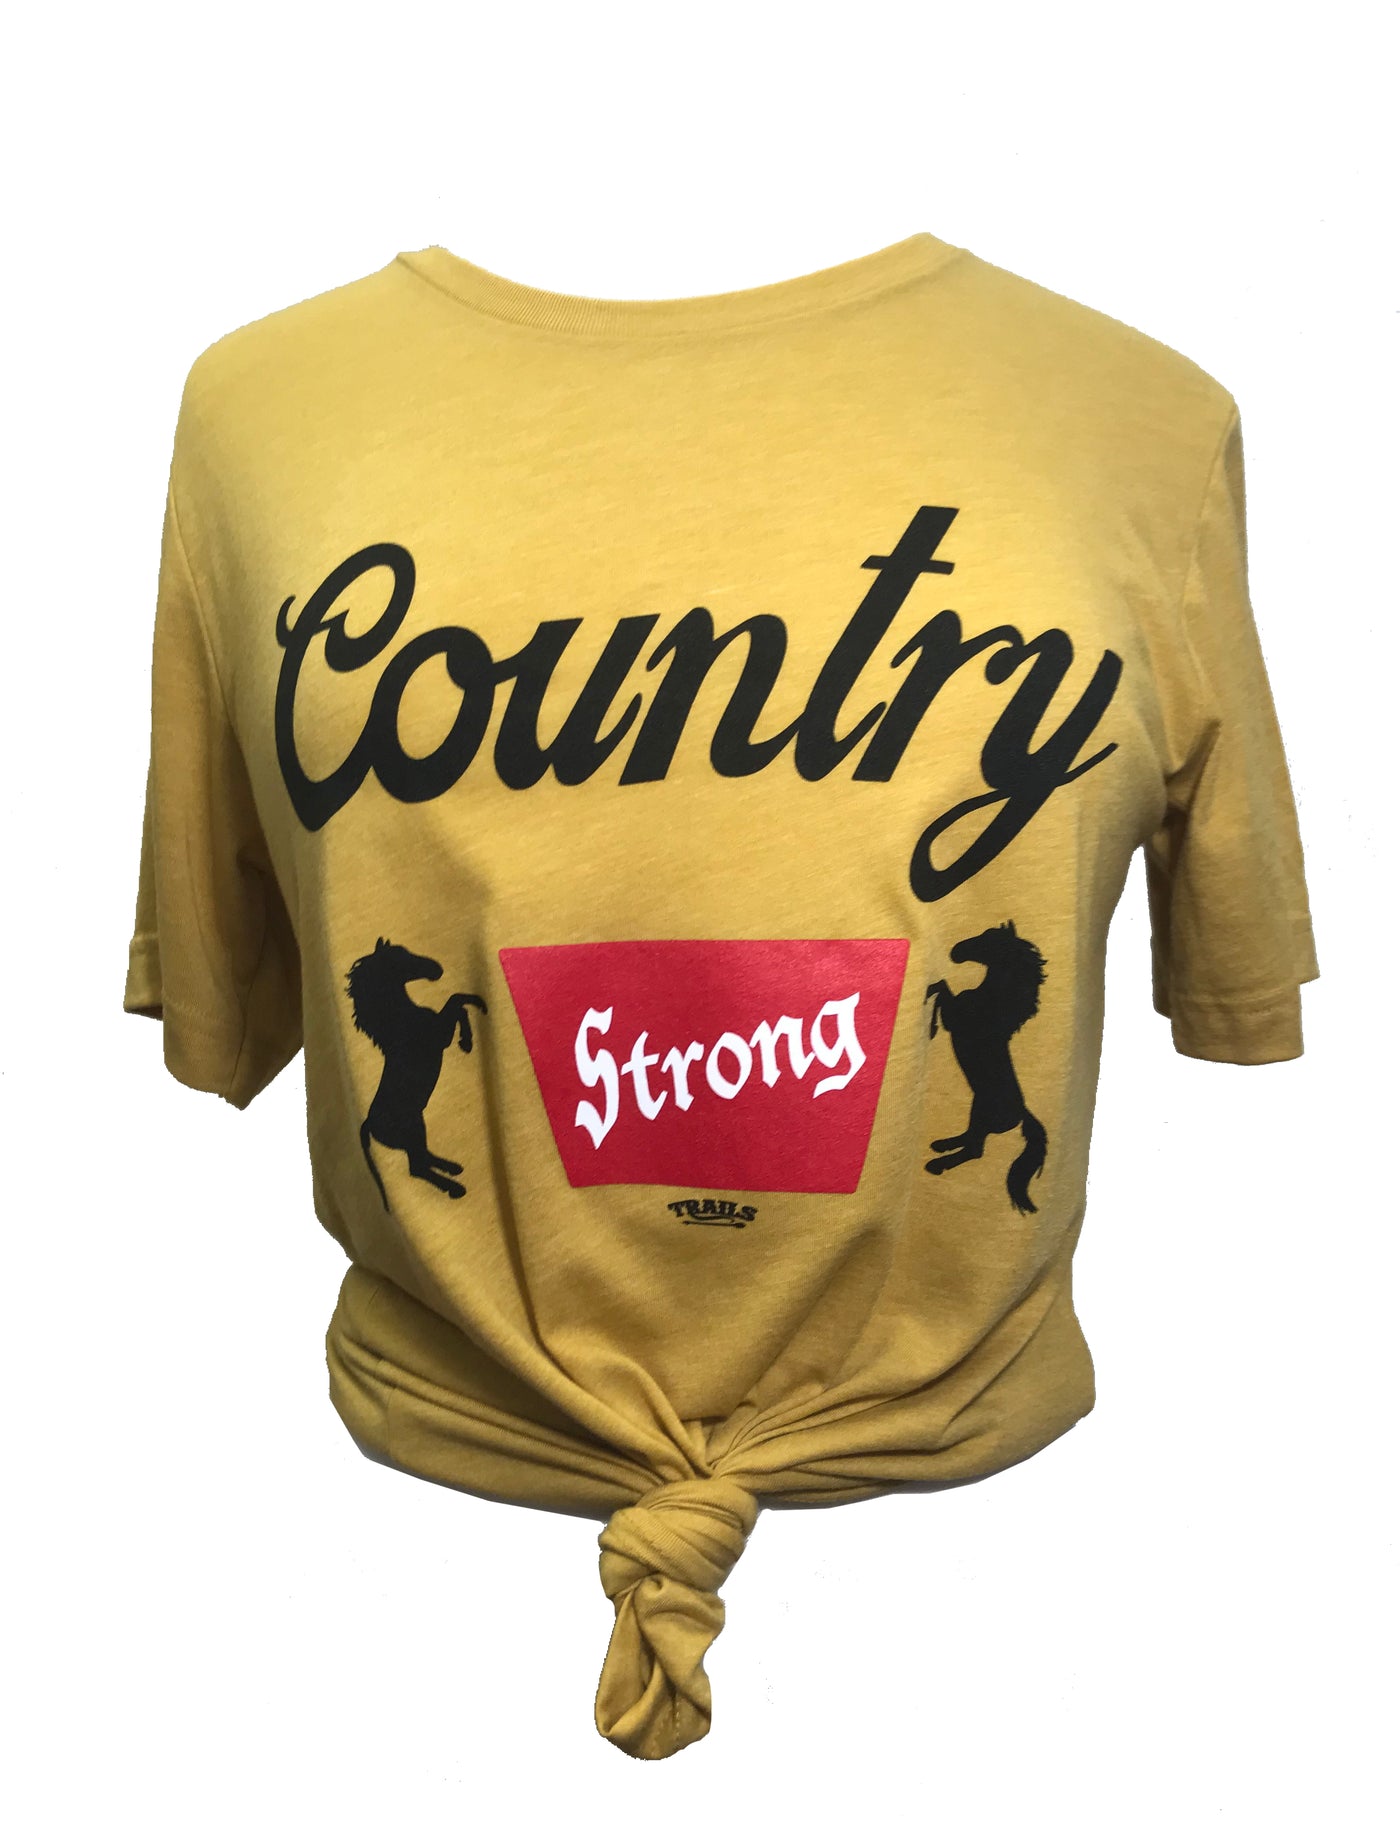 ORIGINAL BANQUET COUNTRY STRONG TEE